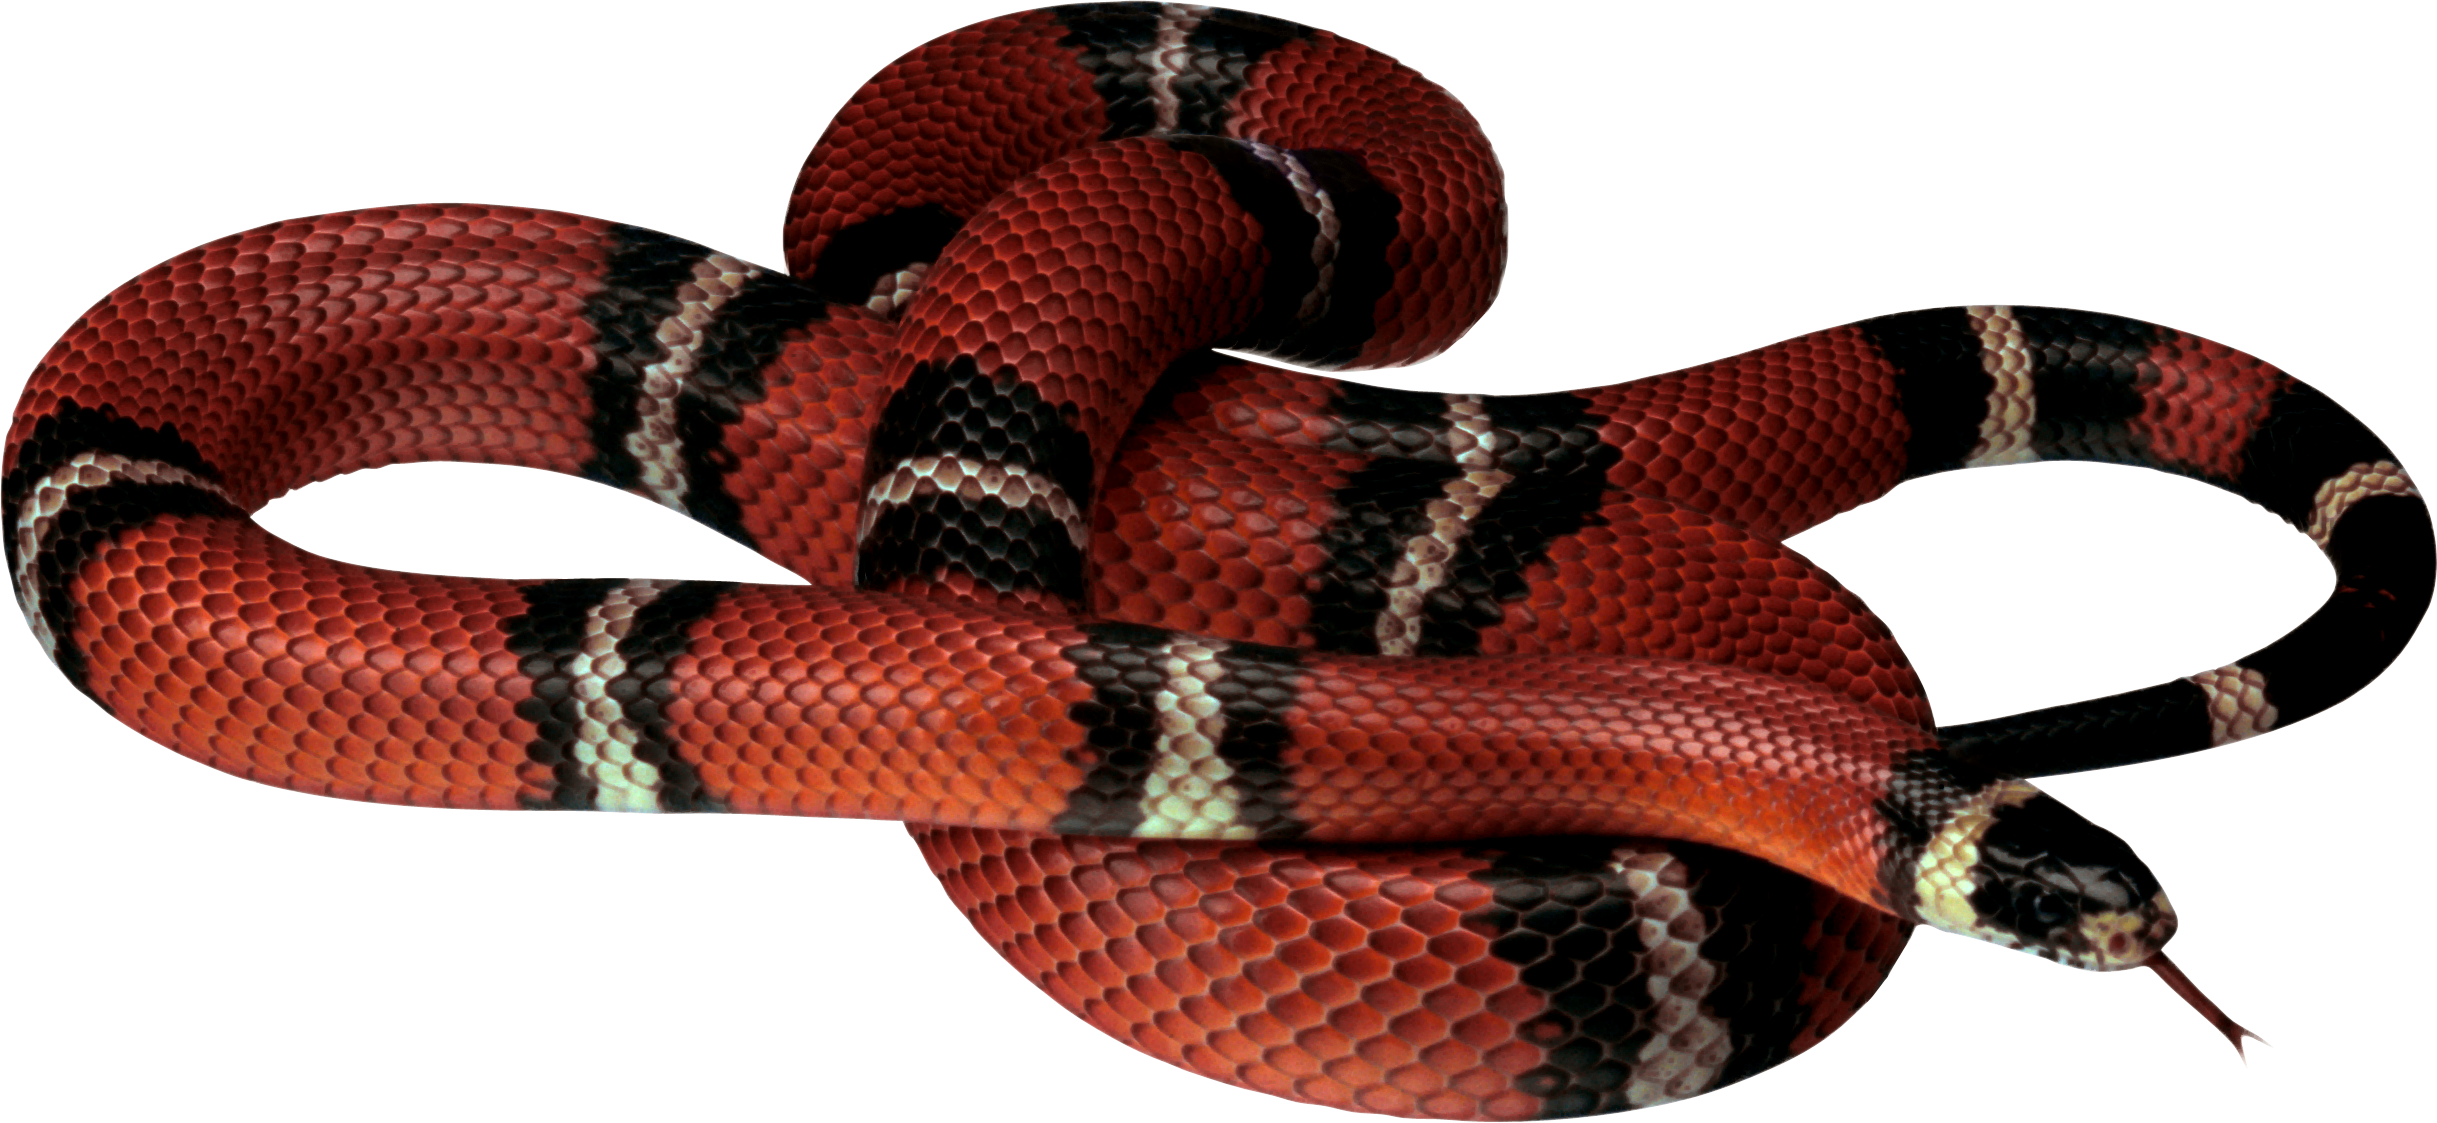 Red Snake Lying On The Ground PNG Image